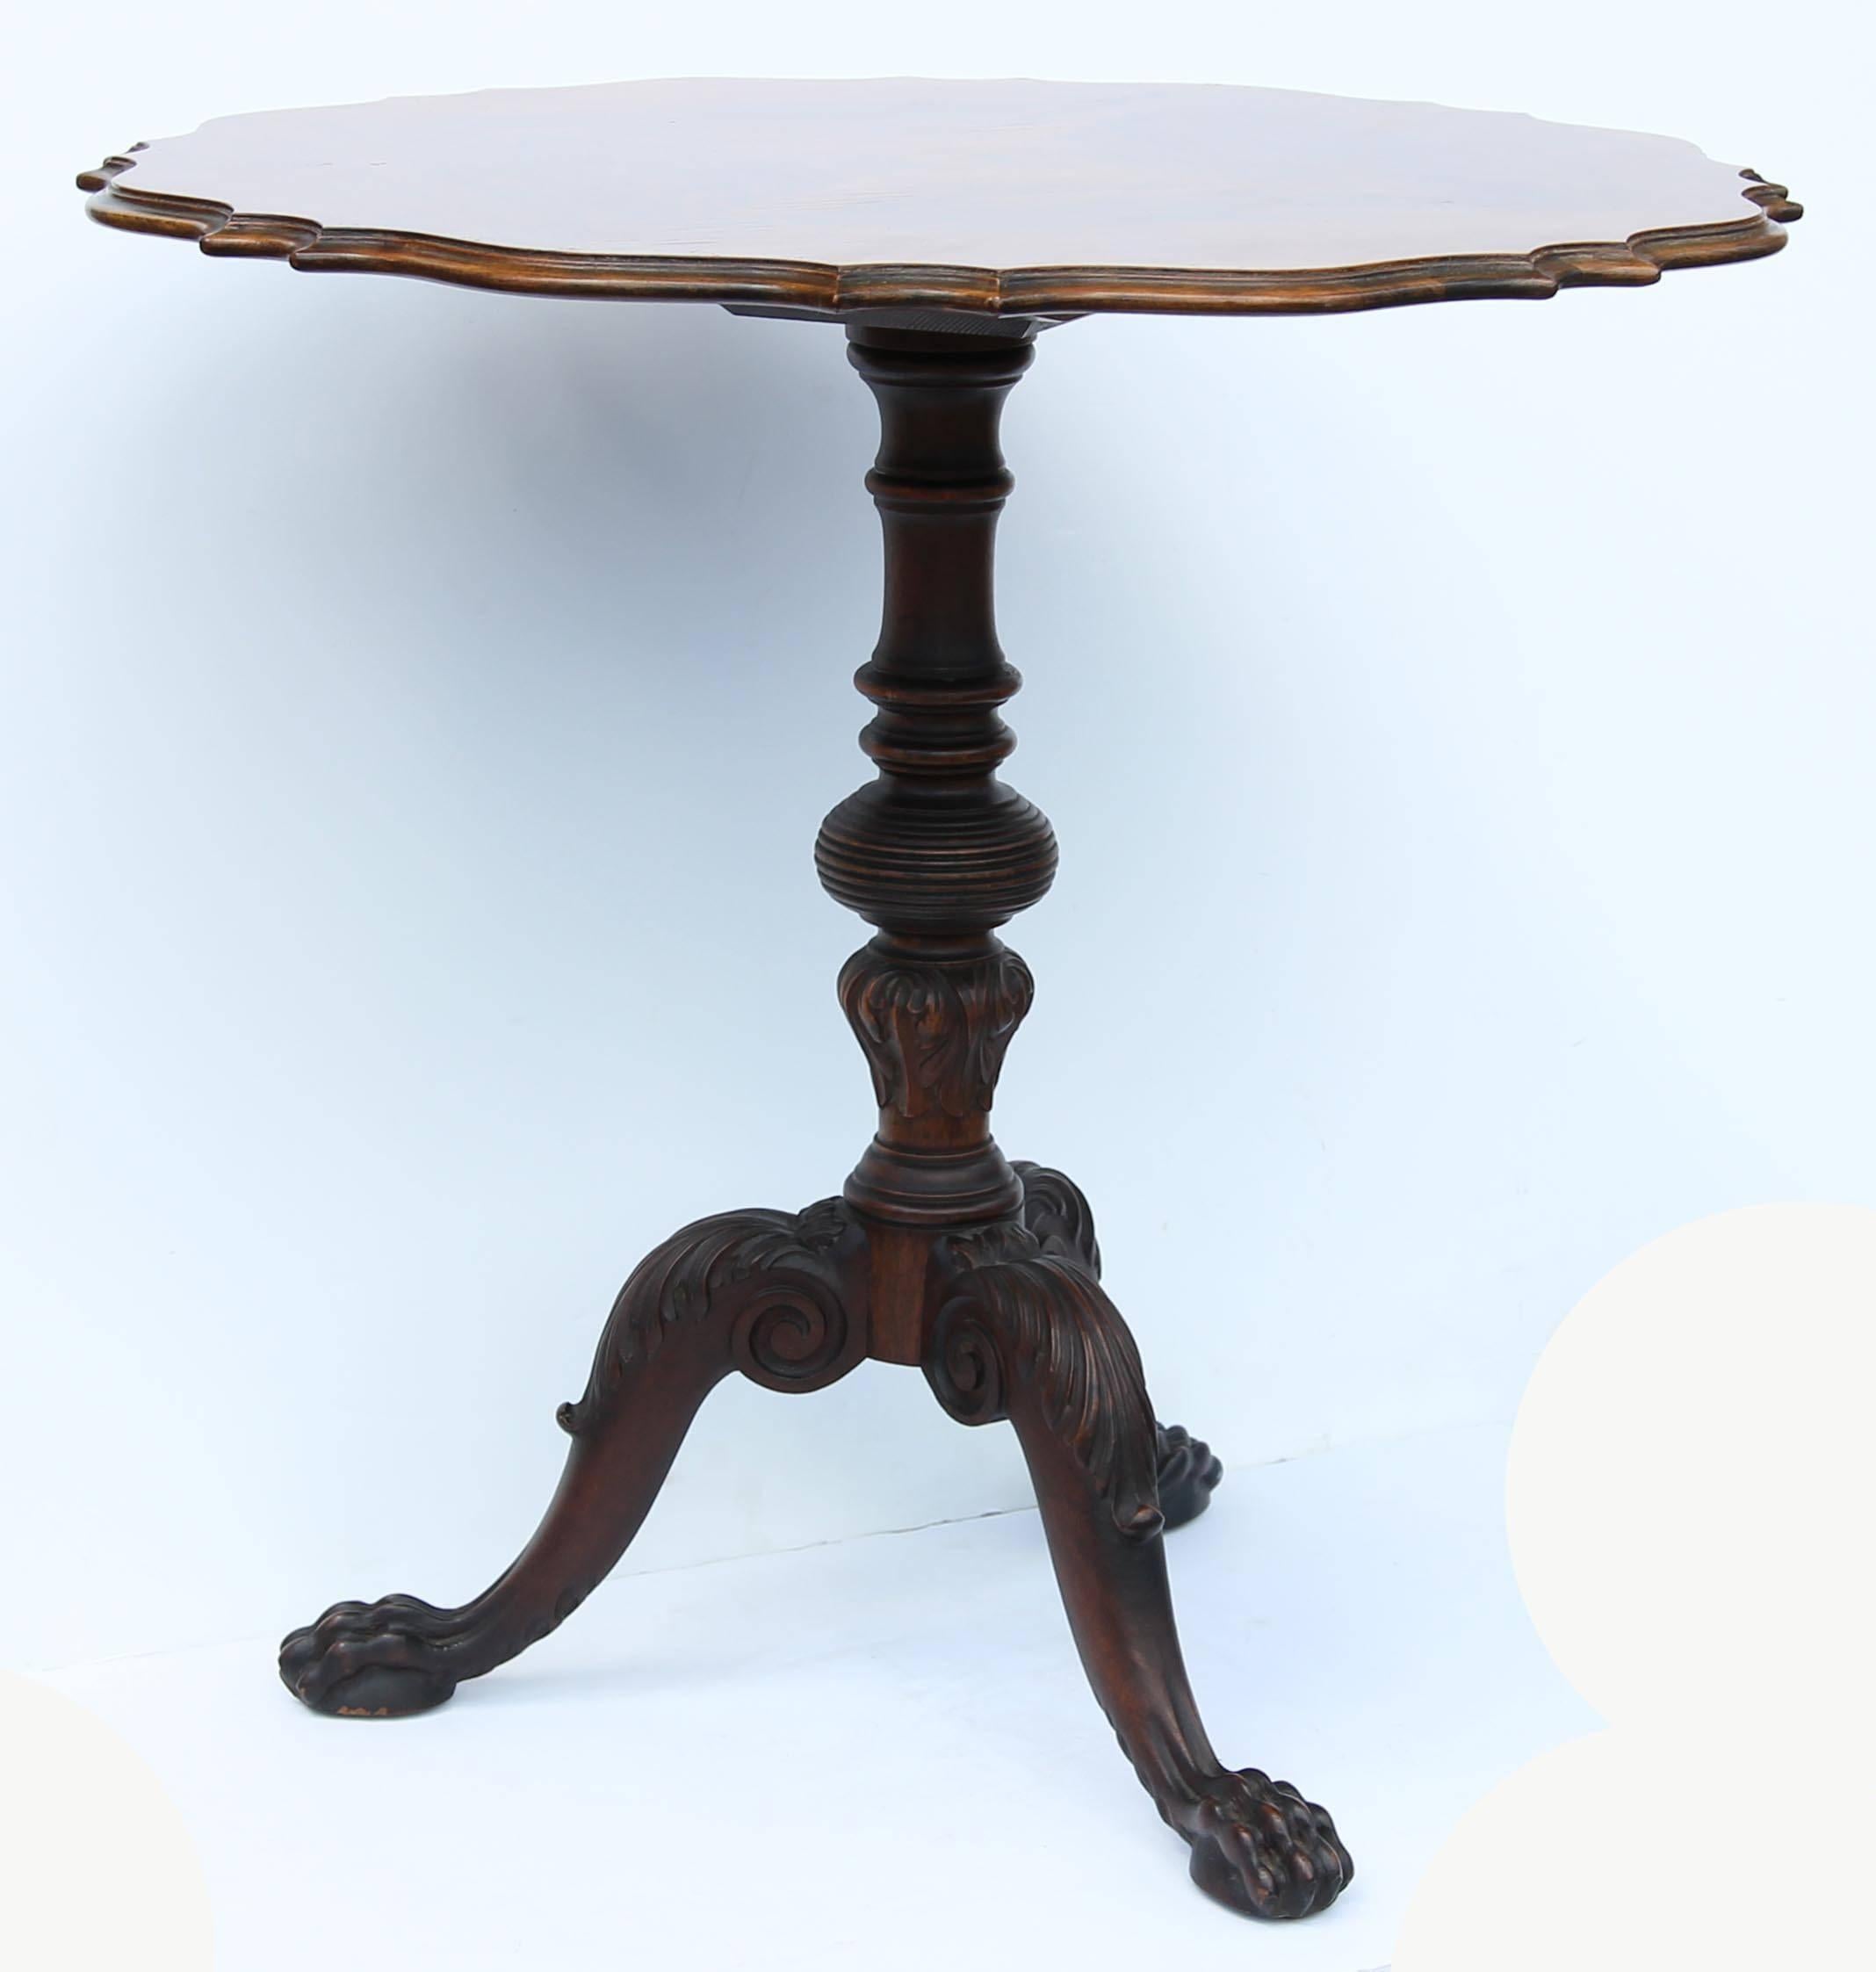 Chippendale centennial pie crust tilt top tea table. Carved mahogany base with figured rosewood top, circa 1920. Exceptional quality carving.